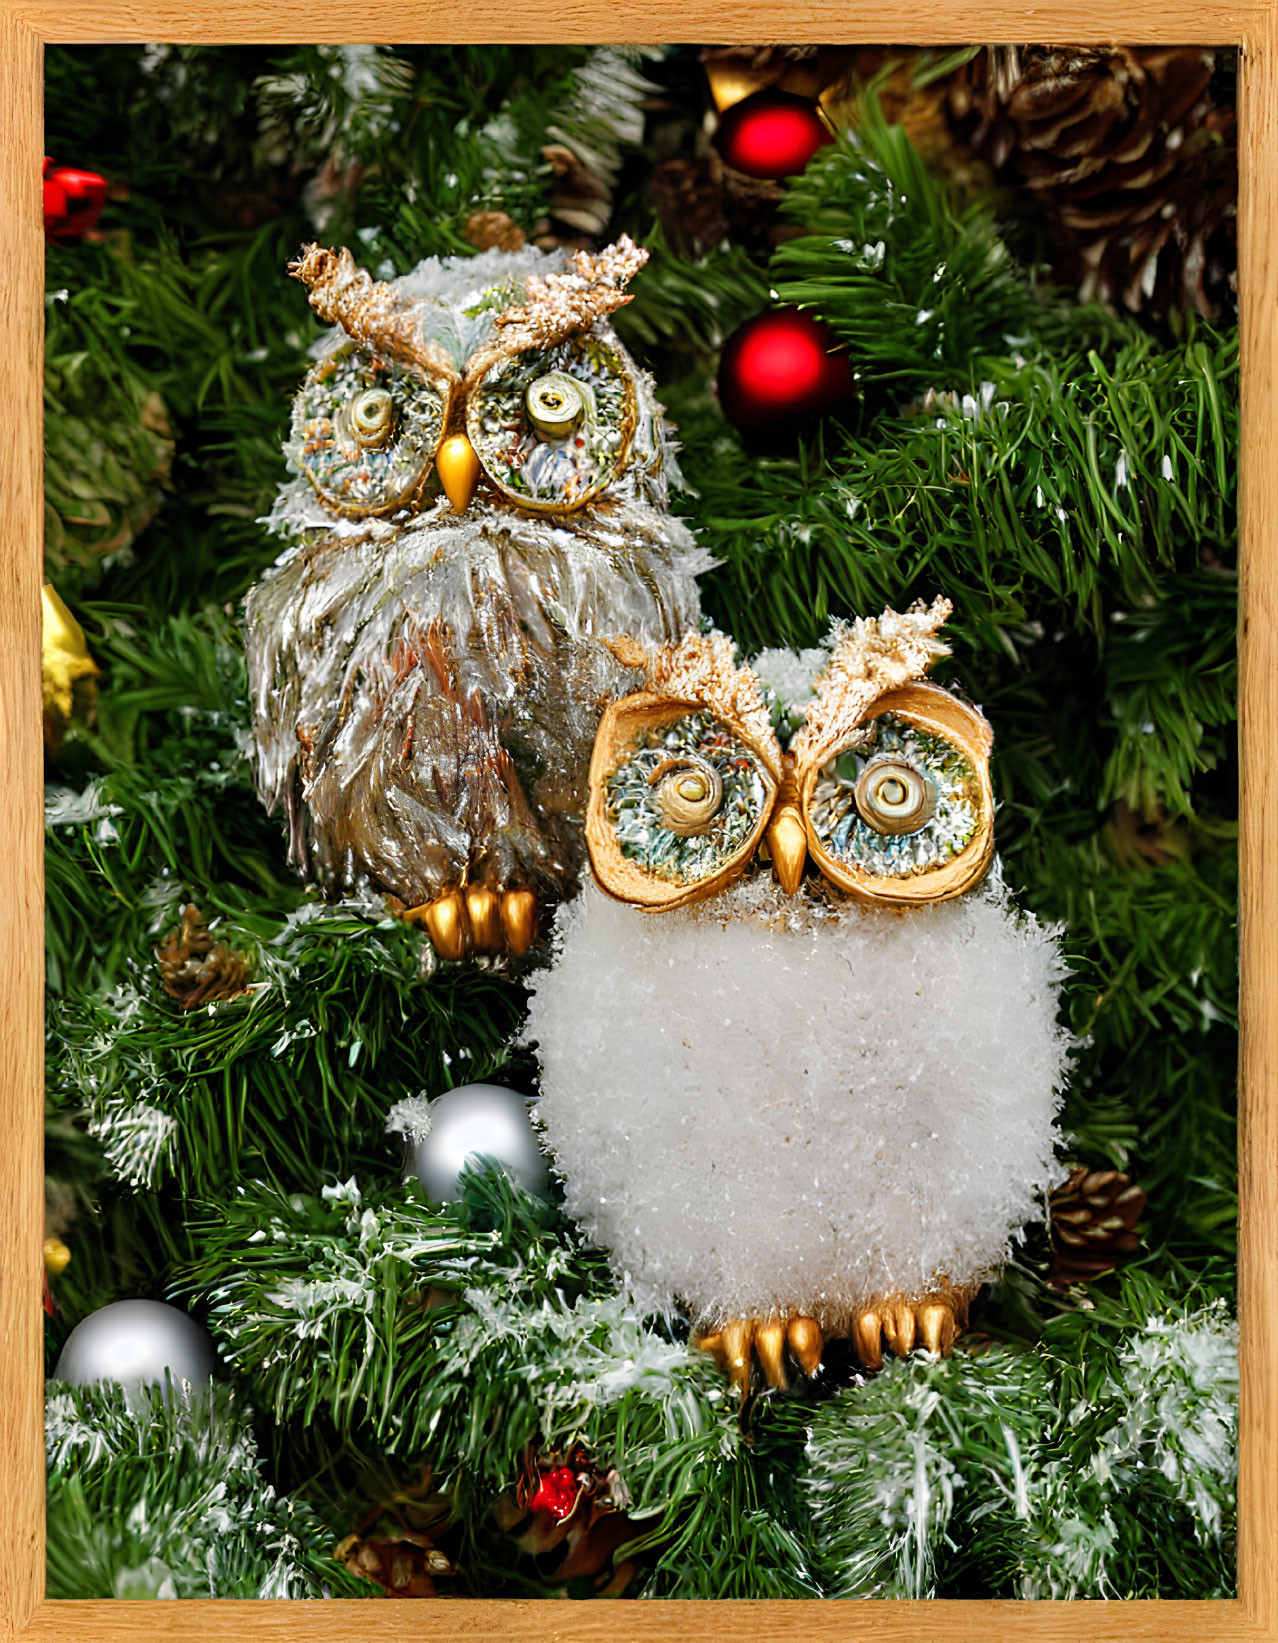 Glittery owl decorations in Christmas greenery with bright eyes